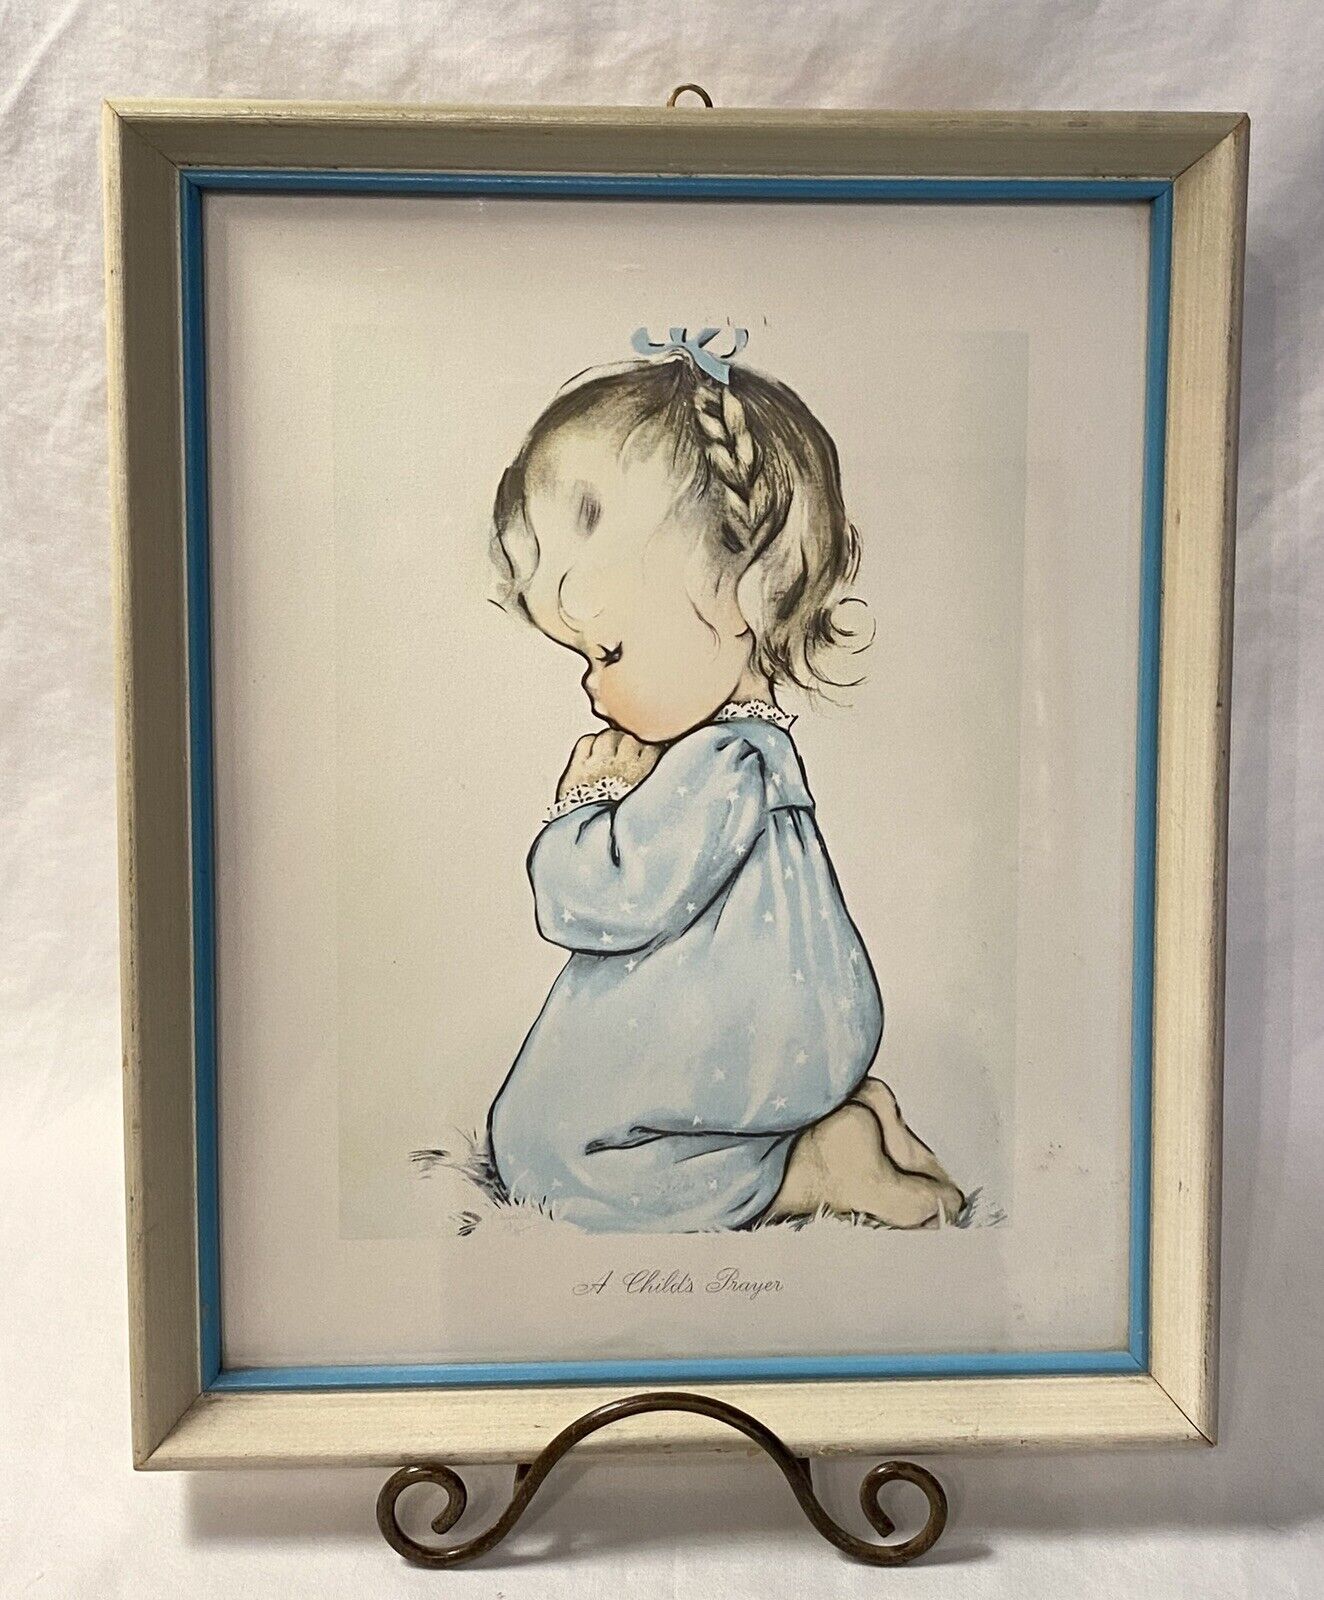 Vintage 1960’s “A Child’s Prayer“ Framed Art With A Personal Dedication 9x11”